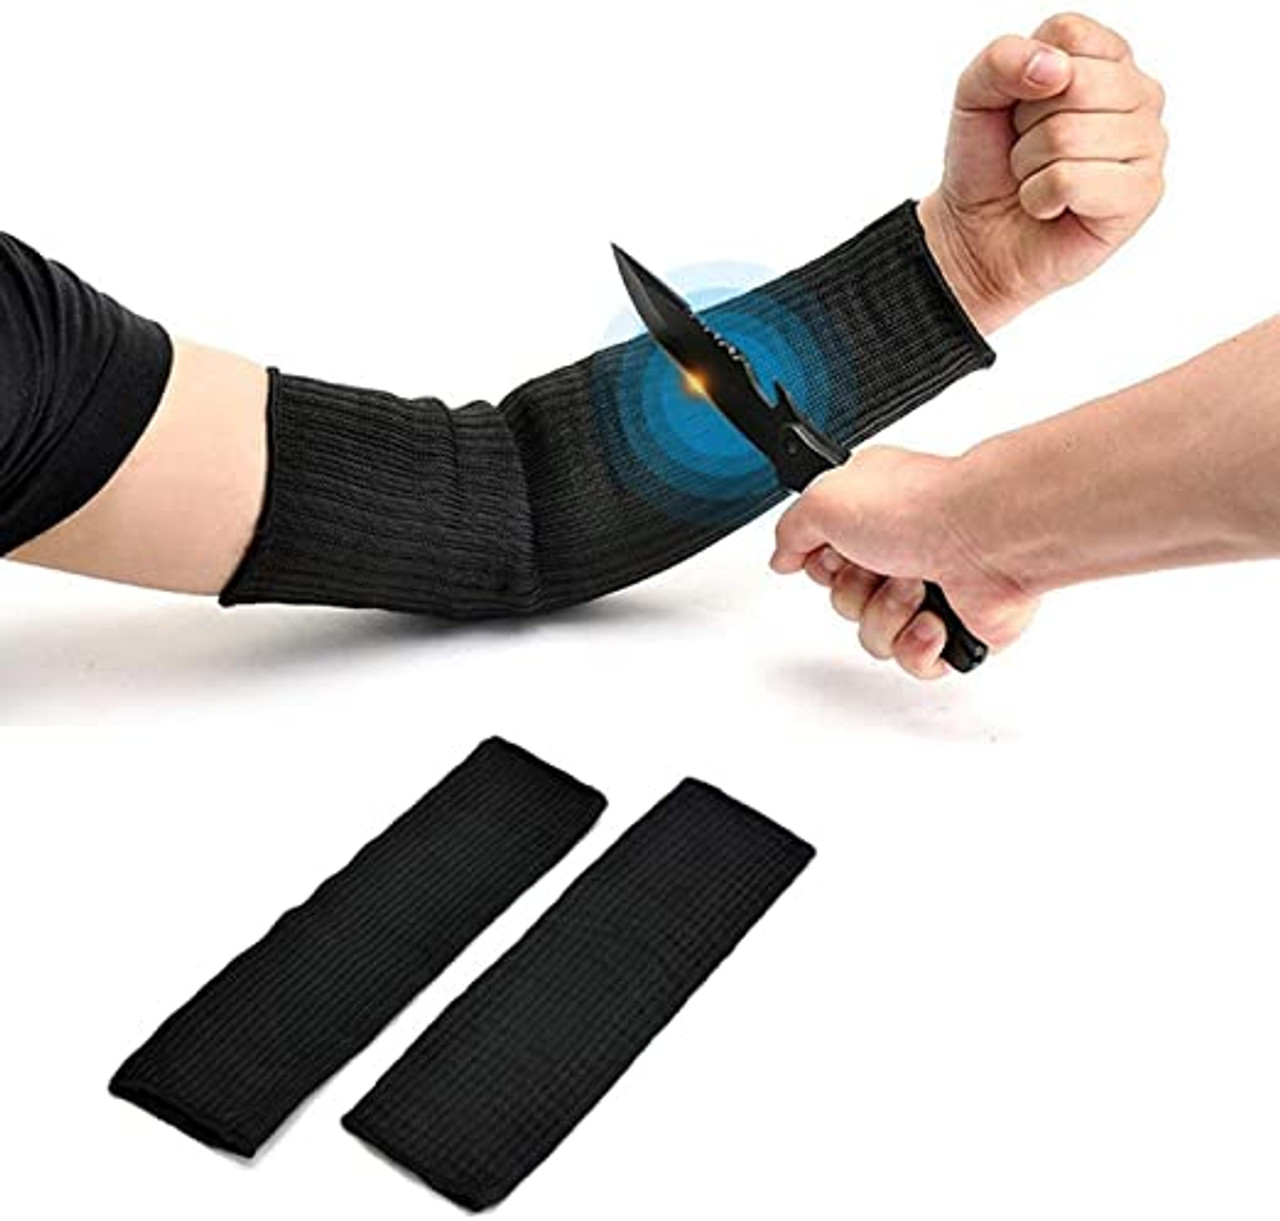 ARM PROTECTION SLEEVE - SM, 10500